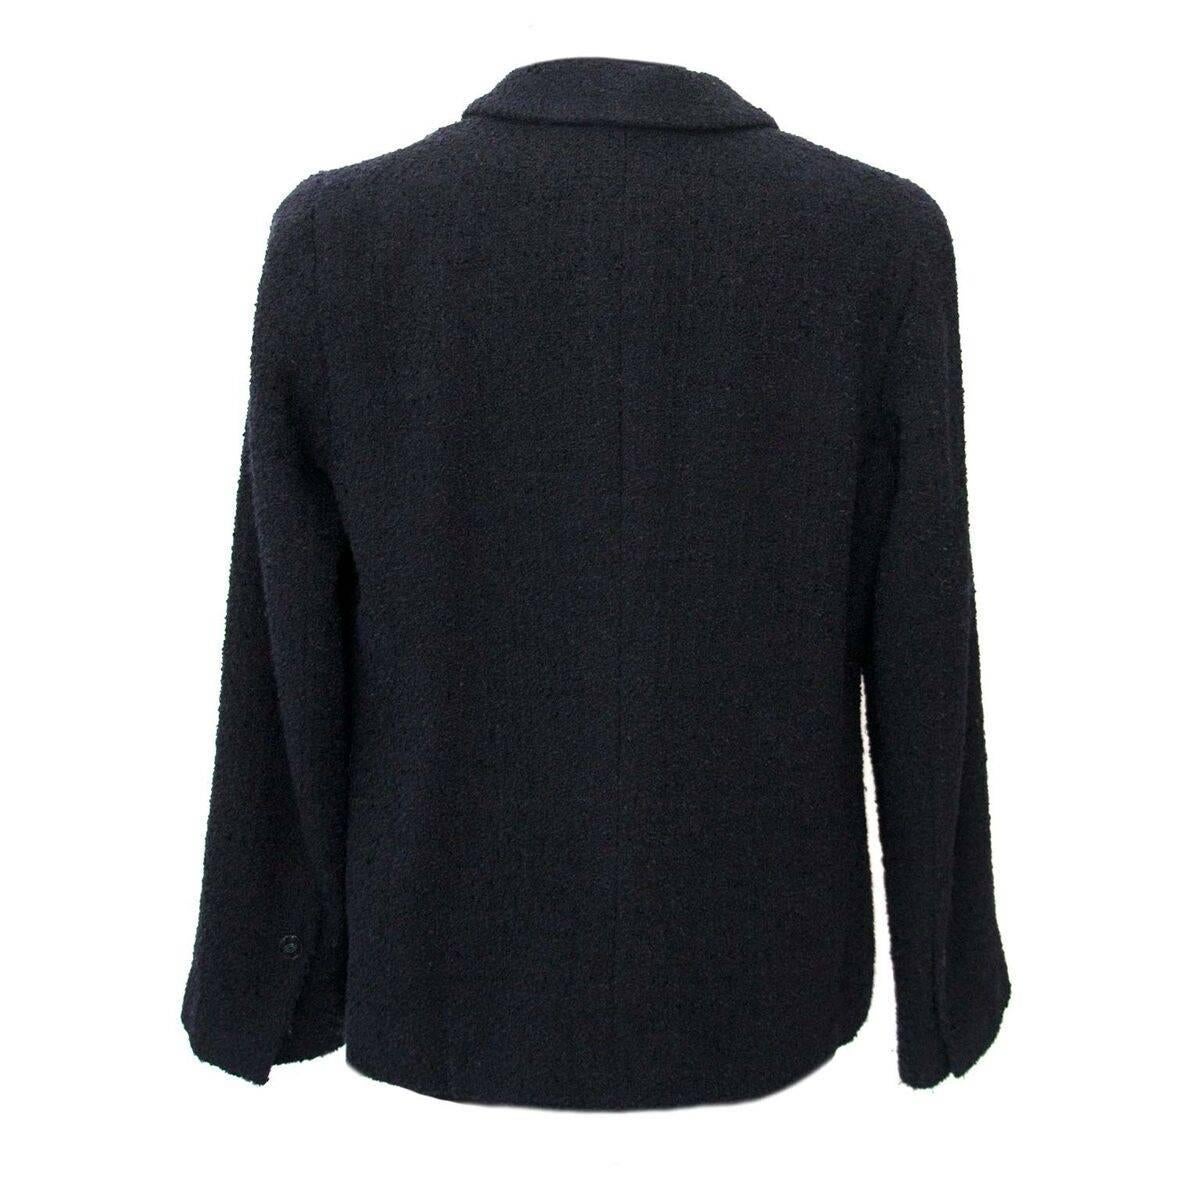 Good preloved condition

Chanel Black Wool Blazer - Size 42

This beautiful black wool blazer with black Chanel buttons details is one chic item.
The iconic Chanel wool makes this blazer a need in every fashionista's closet.
As this blazer features